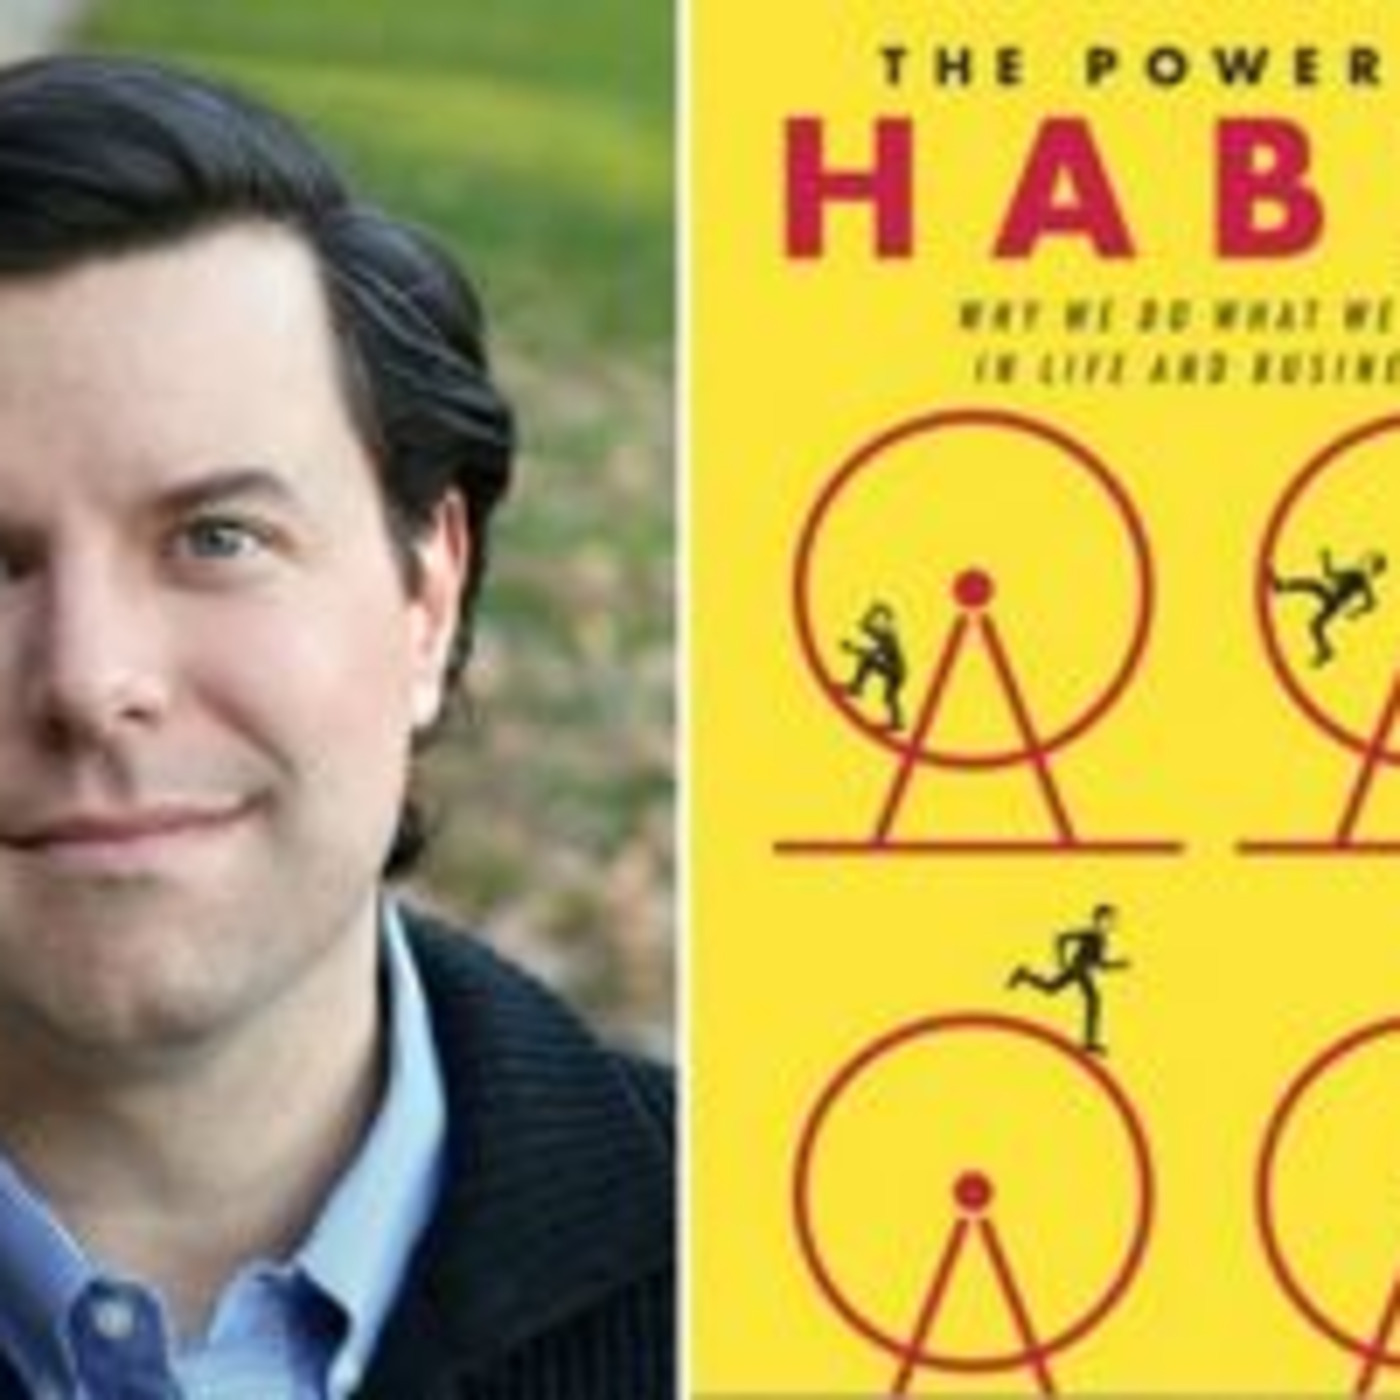 Q&A: CHARLES DUHIGG - THE POWER OF HABIT